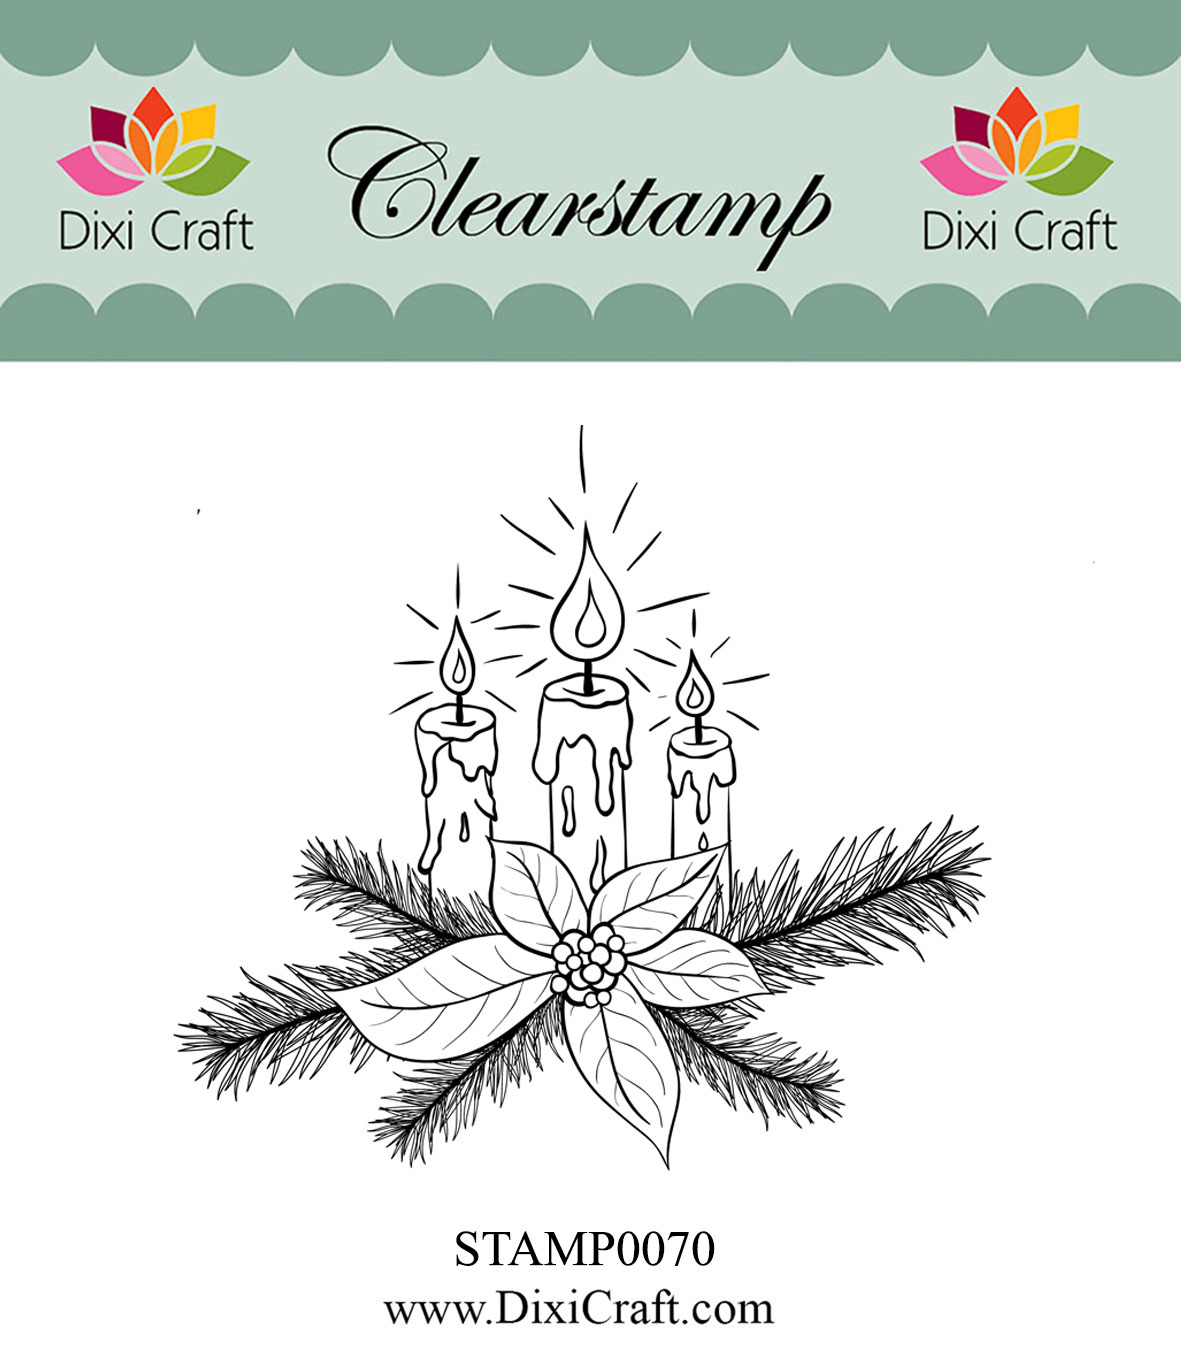 50% OFF Dixi Craft Clearstamp - Candles